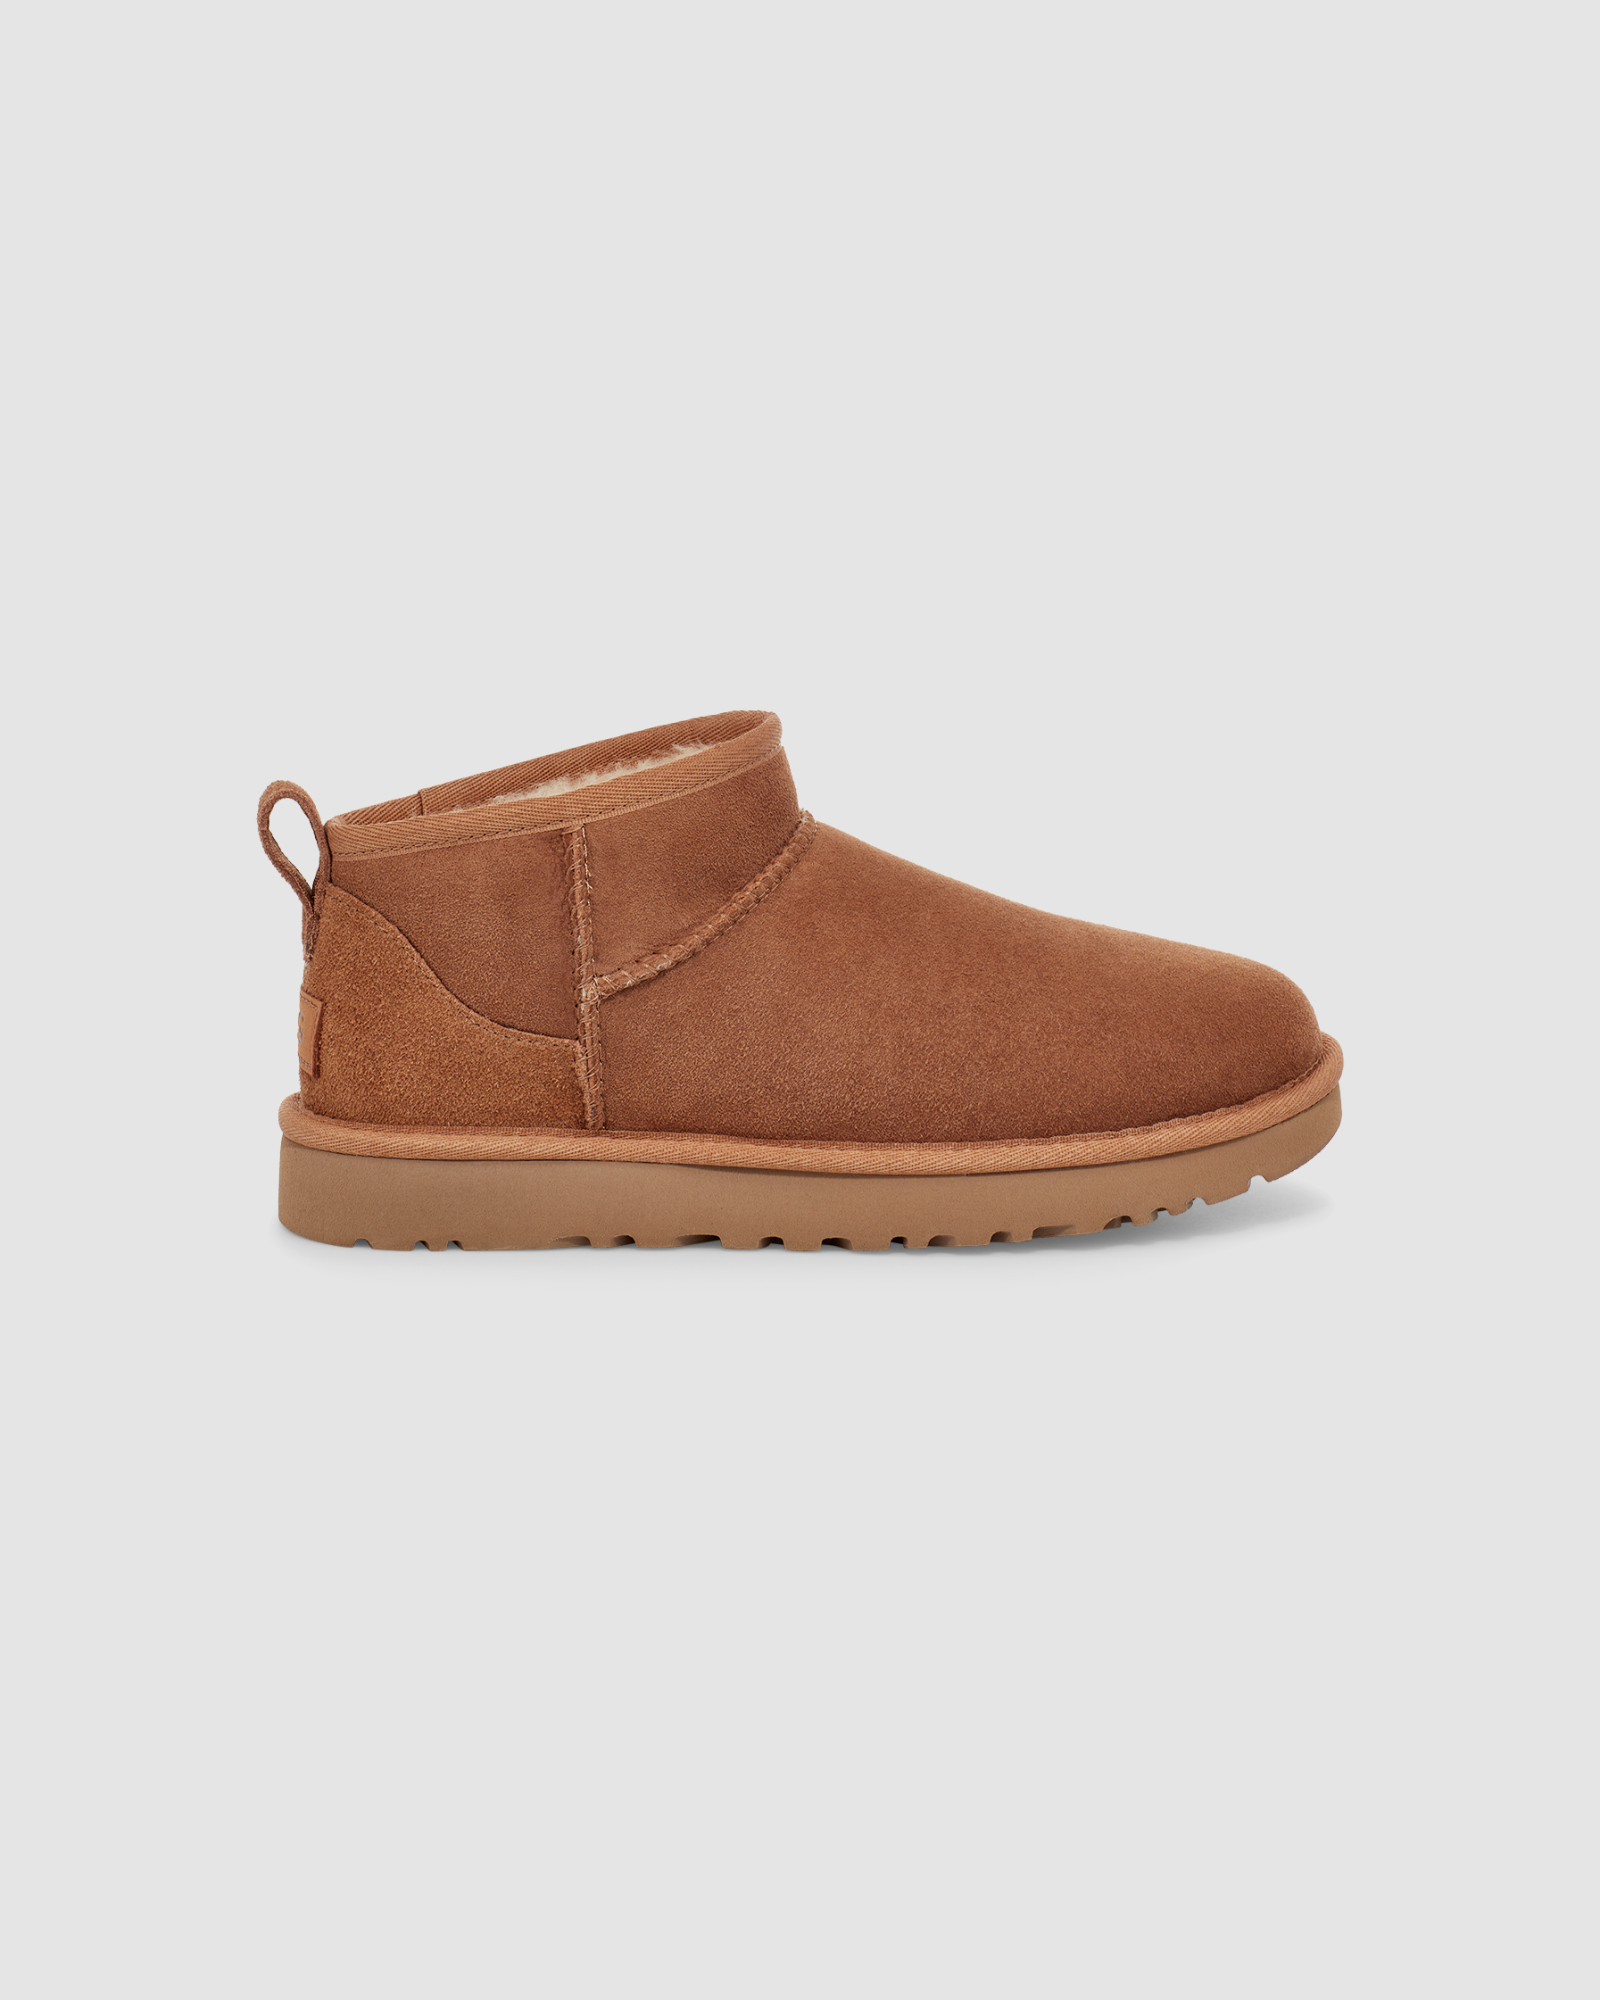 UGG | Shop Boots, Slippers & Shoes - Undeniably Authentic | UGG